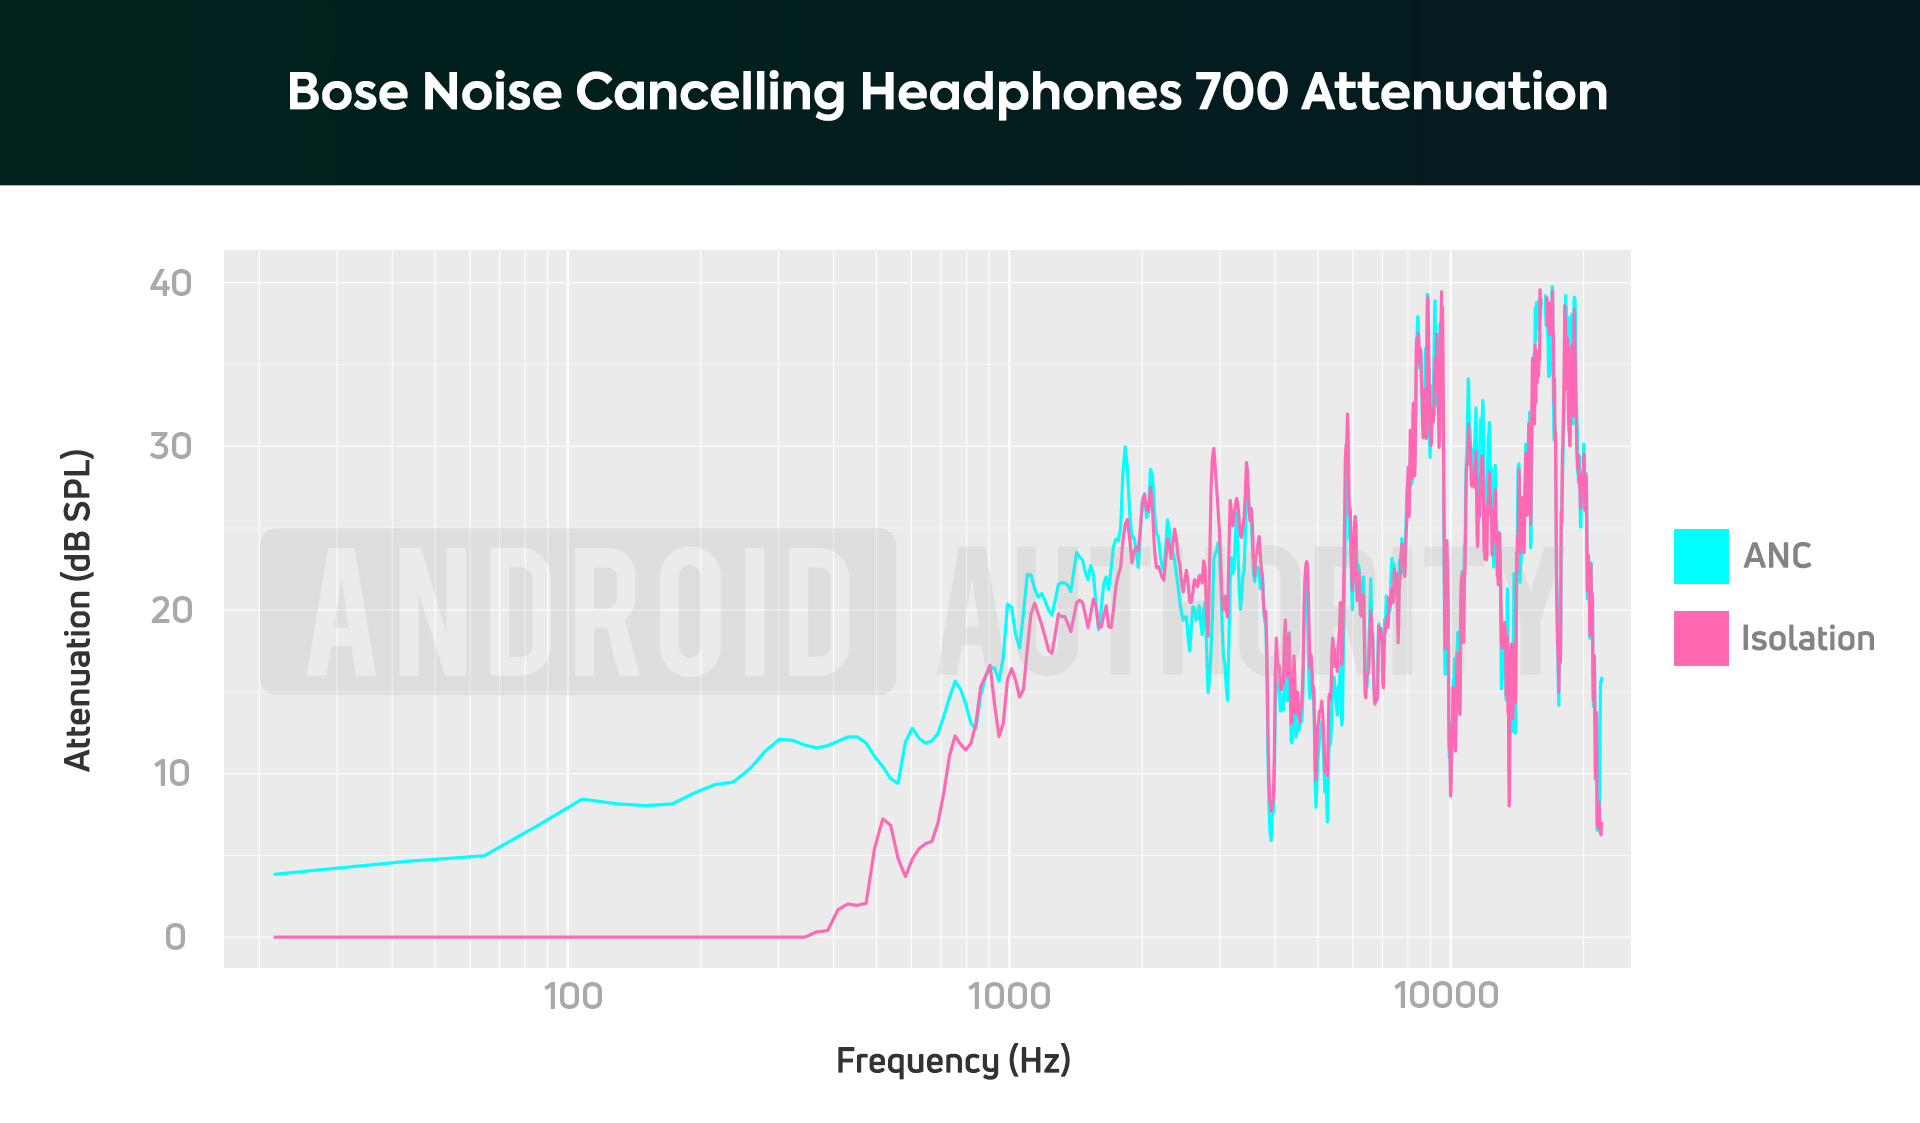 Bose Noise Cancelling Headphones 700 AA noise cancelling attenuation chart